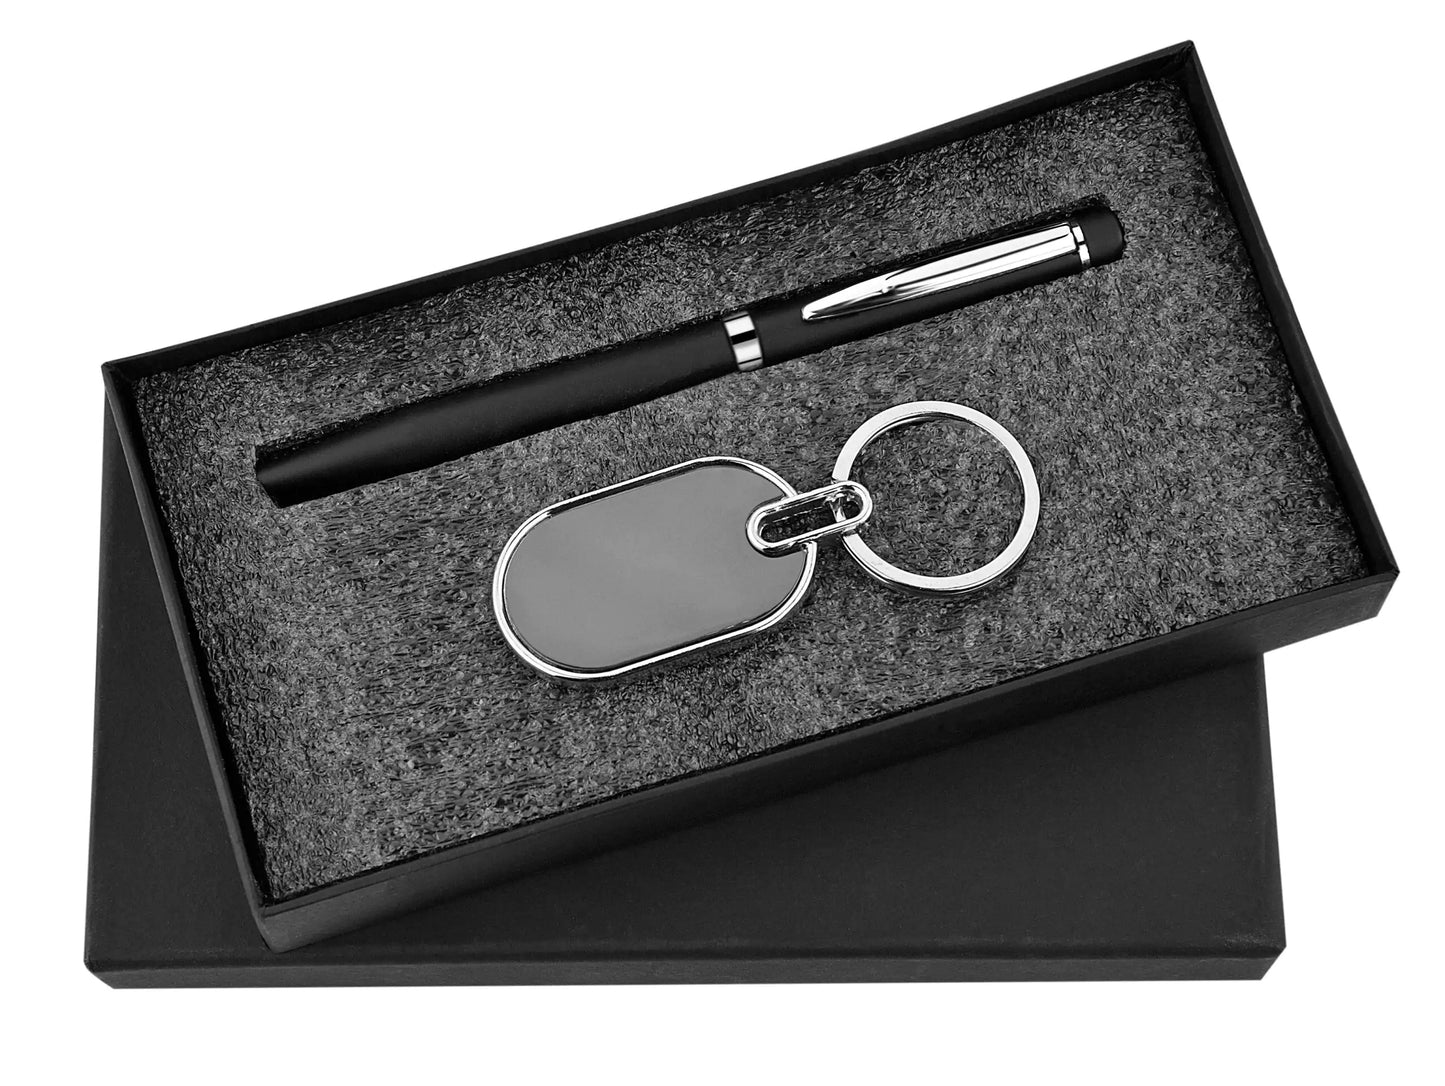 Pen and Keychain 2in1 Combo Gift Set - For Employee Joining Kit, Corporate, Client or Dealer Gifting, Promotional Freebie JKSR105